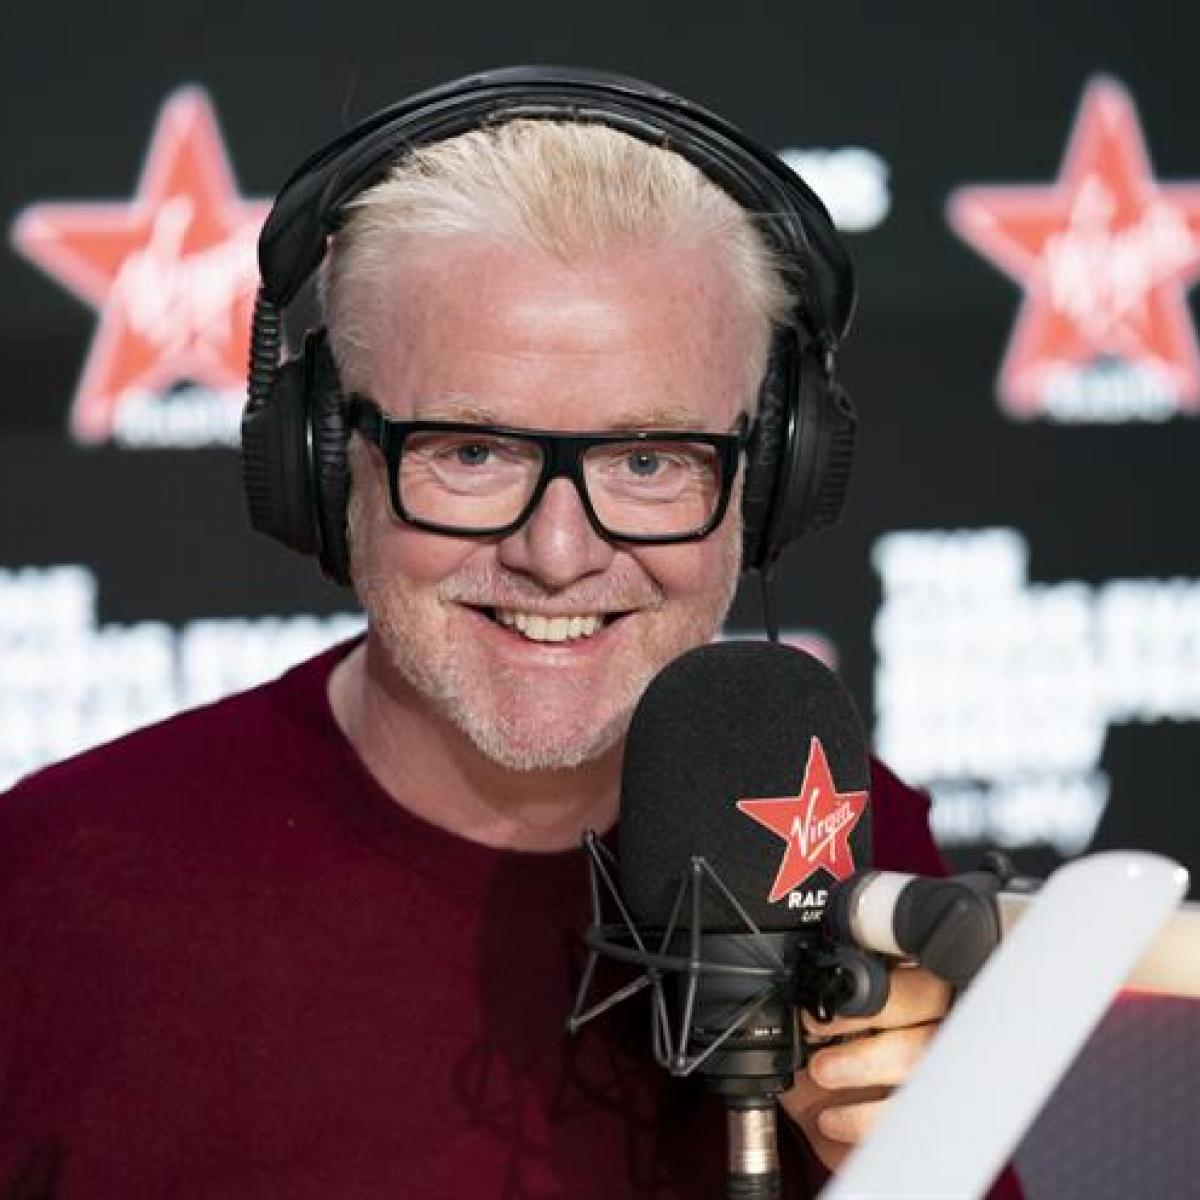 Chris Evans at the microphone in the studio at Virgin Radio